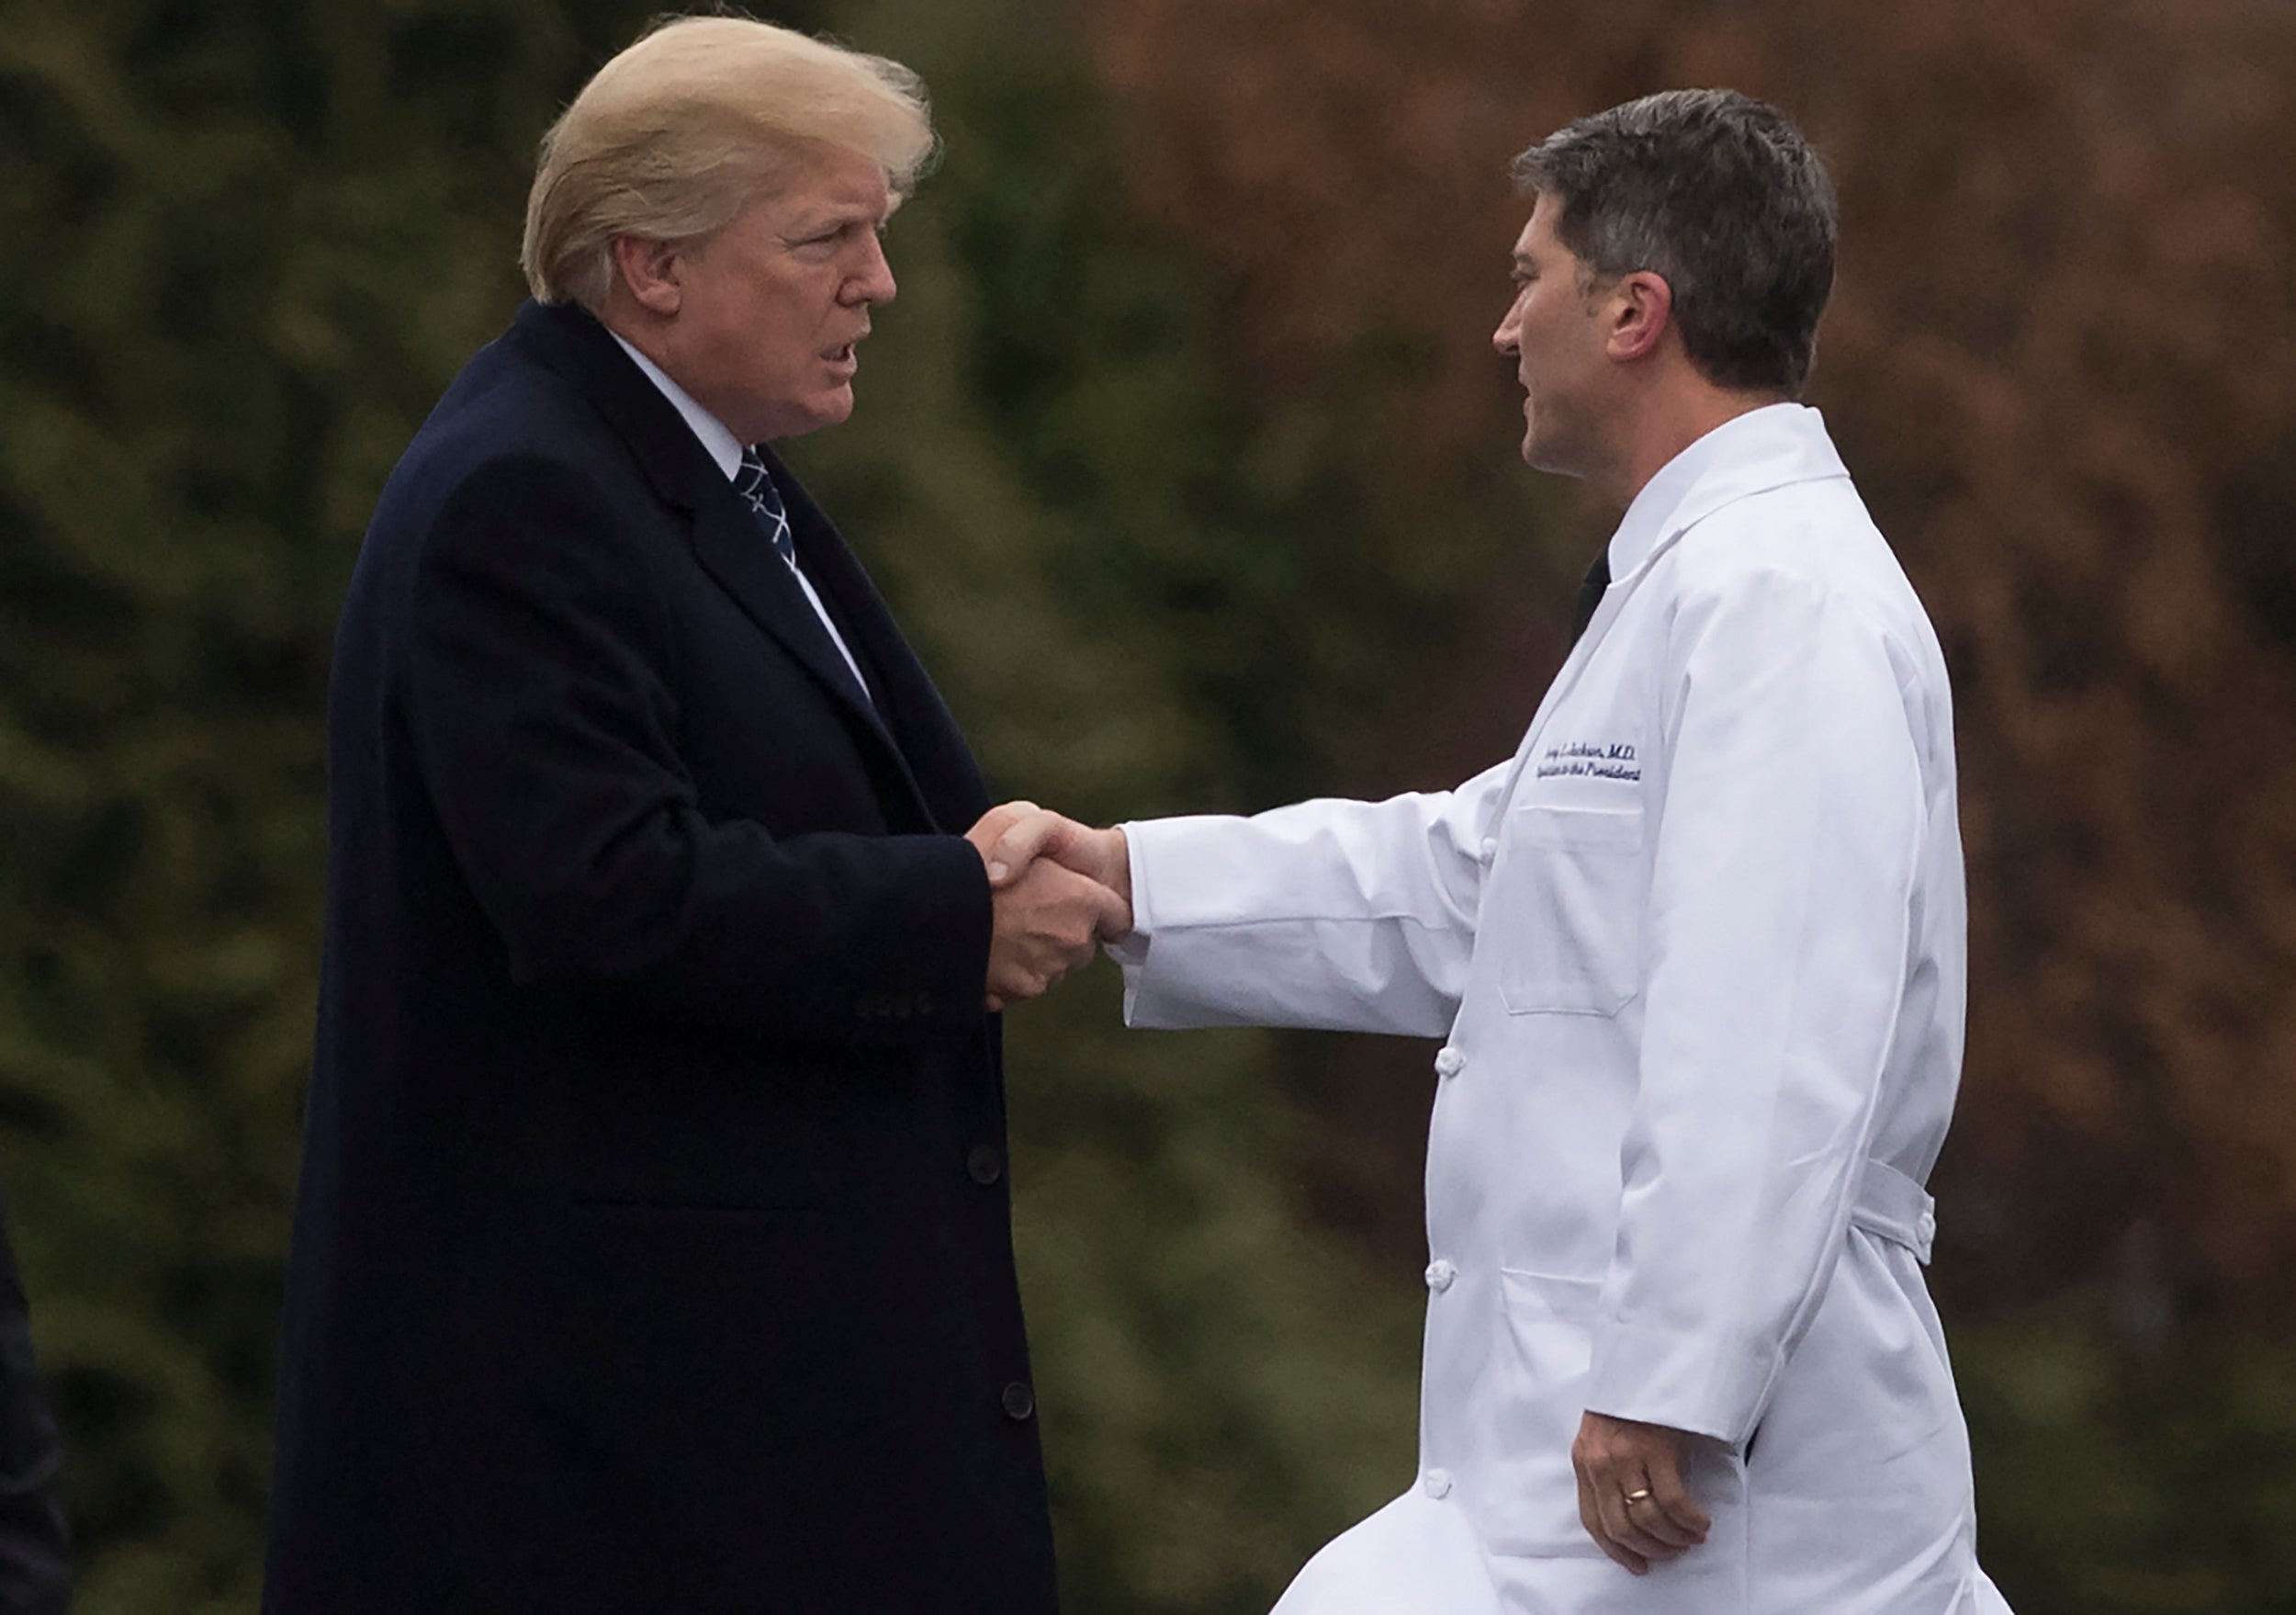 Donald Trump (left) shakes hands with Ronny Jackson (right) in 2018. The former president forgot Jackson’s name seconds after challenging Joe Biden to a cognitive test